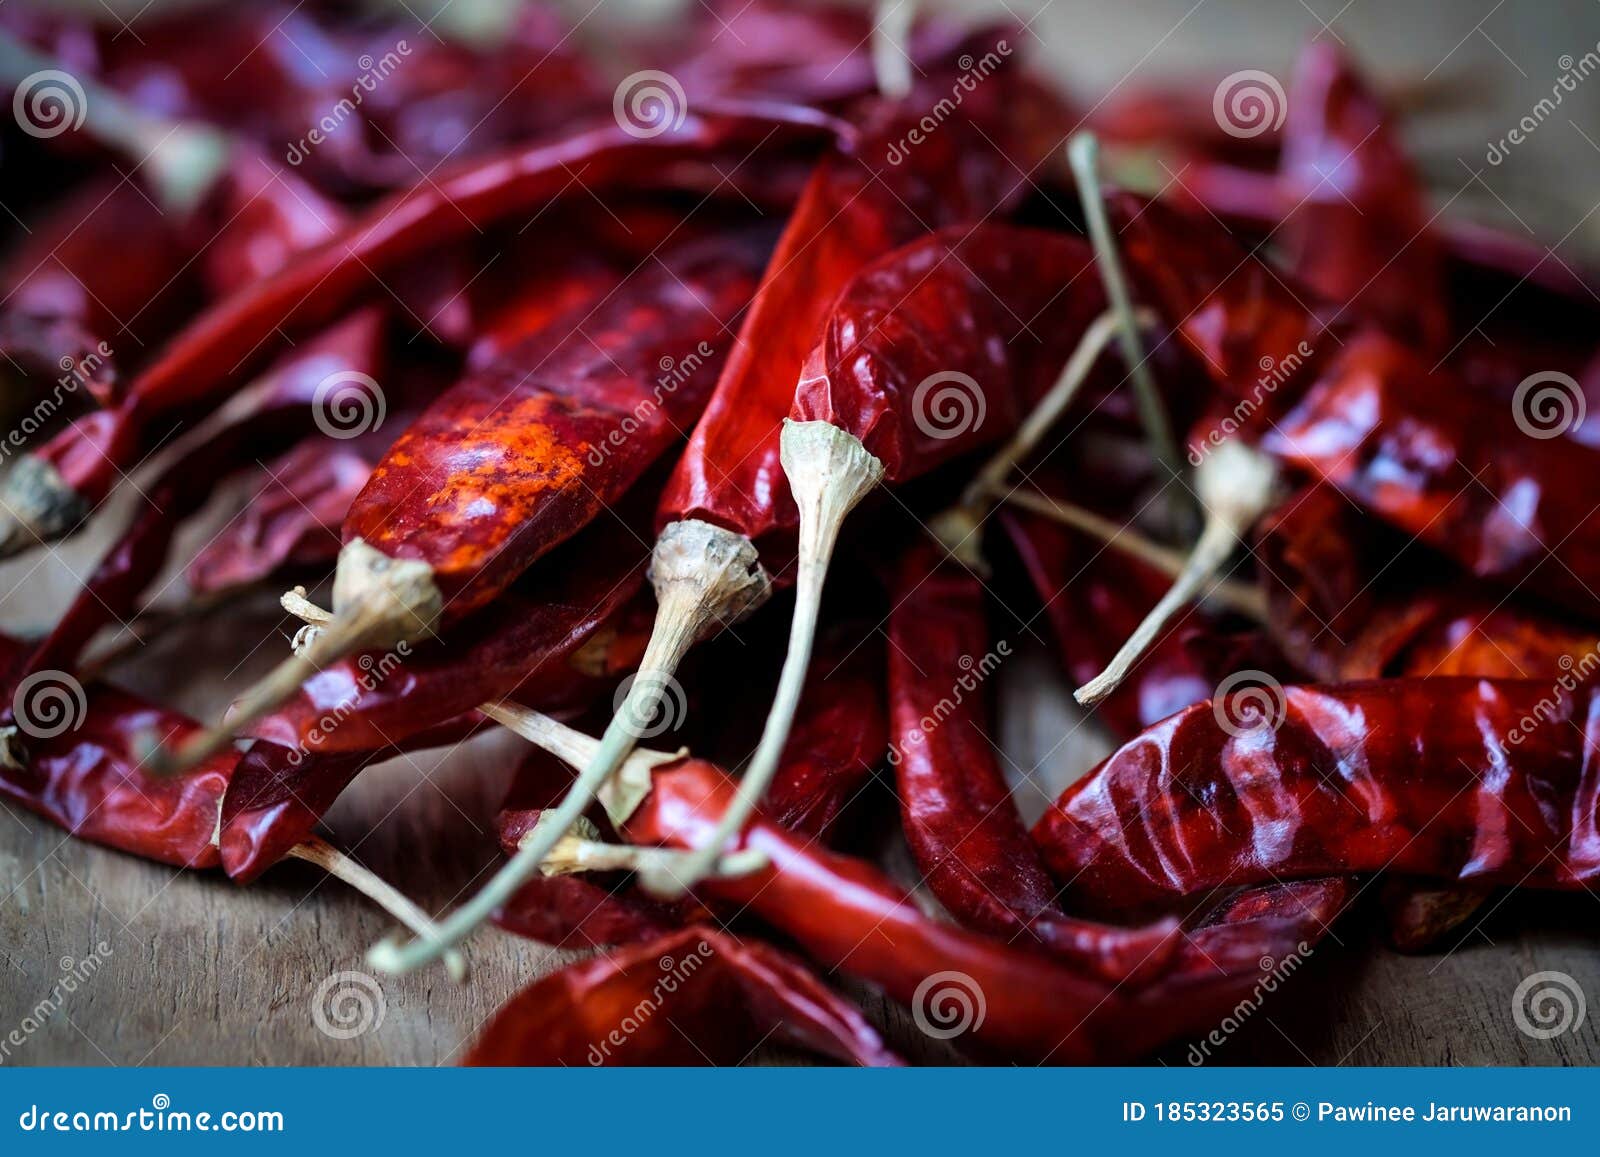 Dried Red Hot Chili On Wooden Plate Food Ingredient For Spicy Recipe Stock Image Image Of Food Cooking 185323565